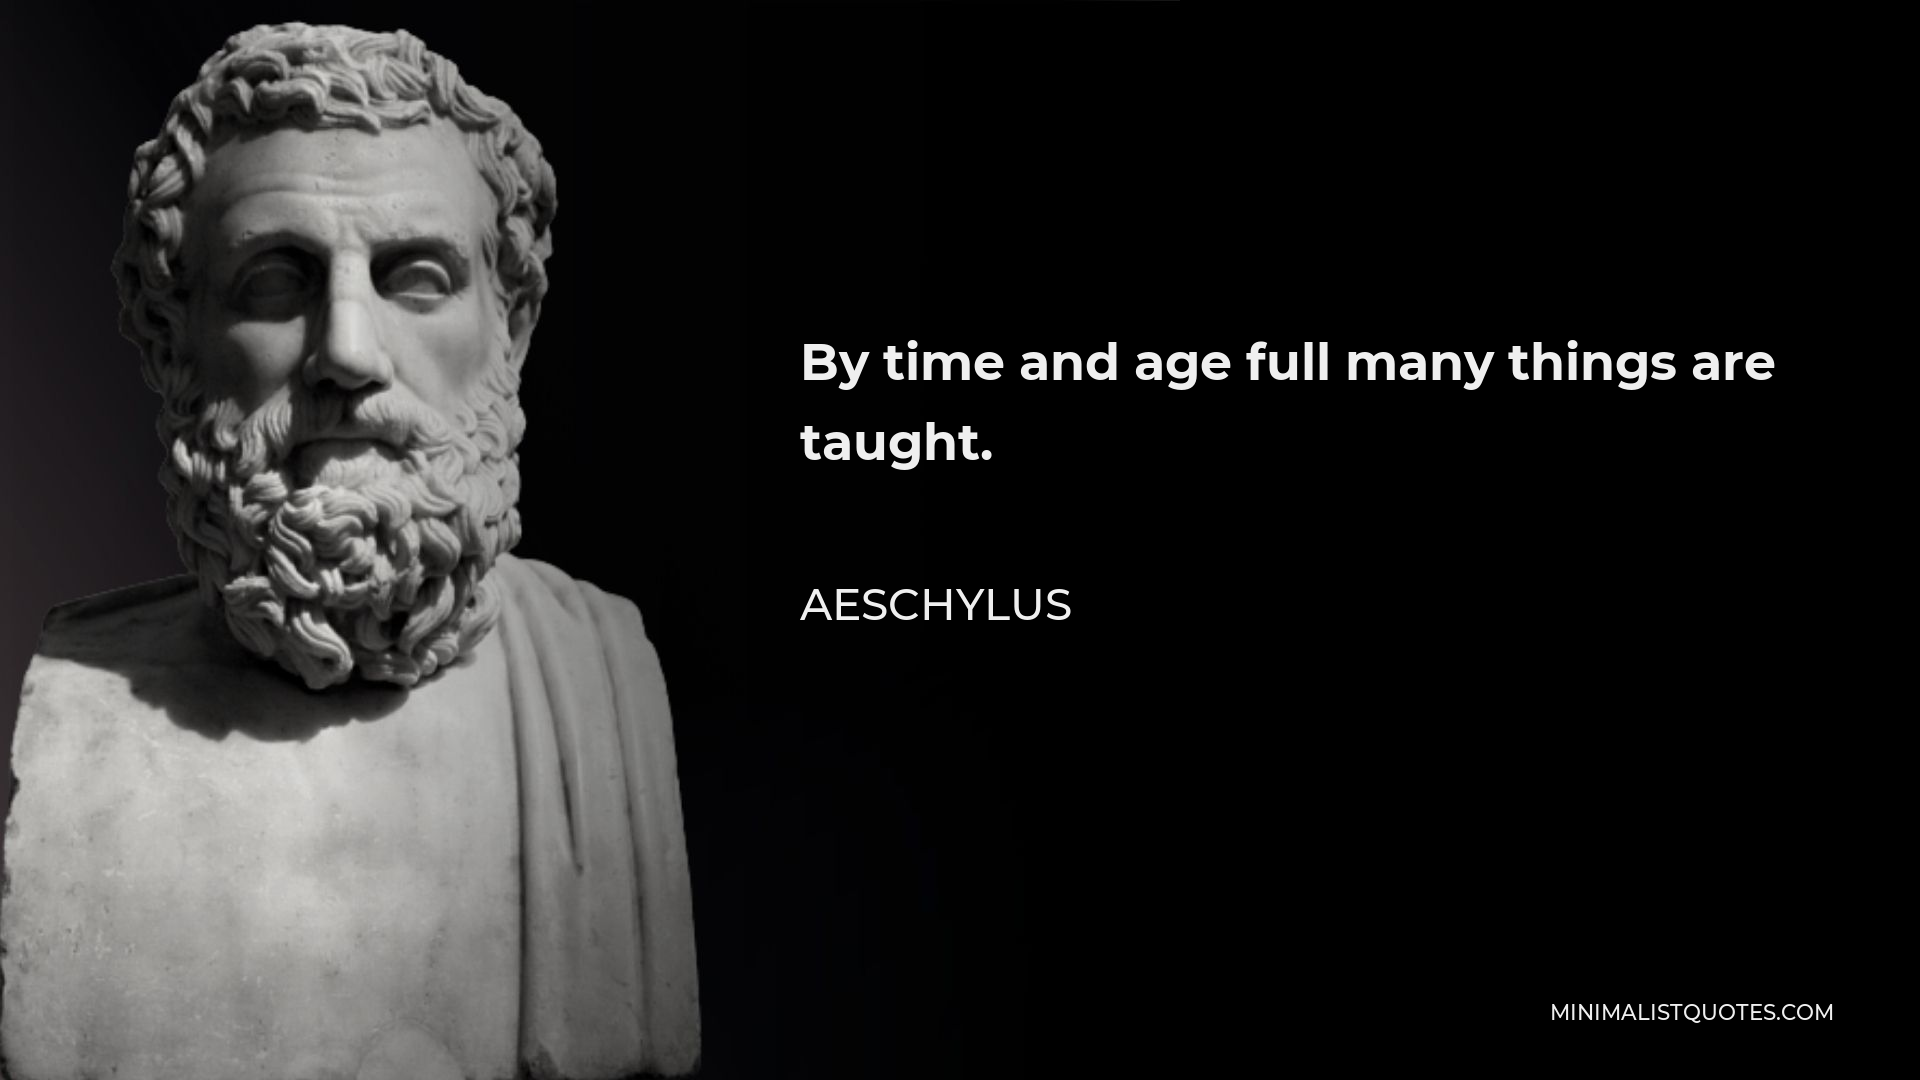 Aeschylus Quote - By time and age full many things are taught.